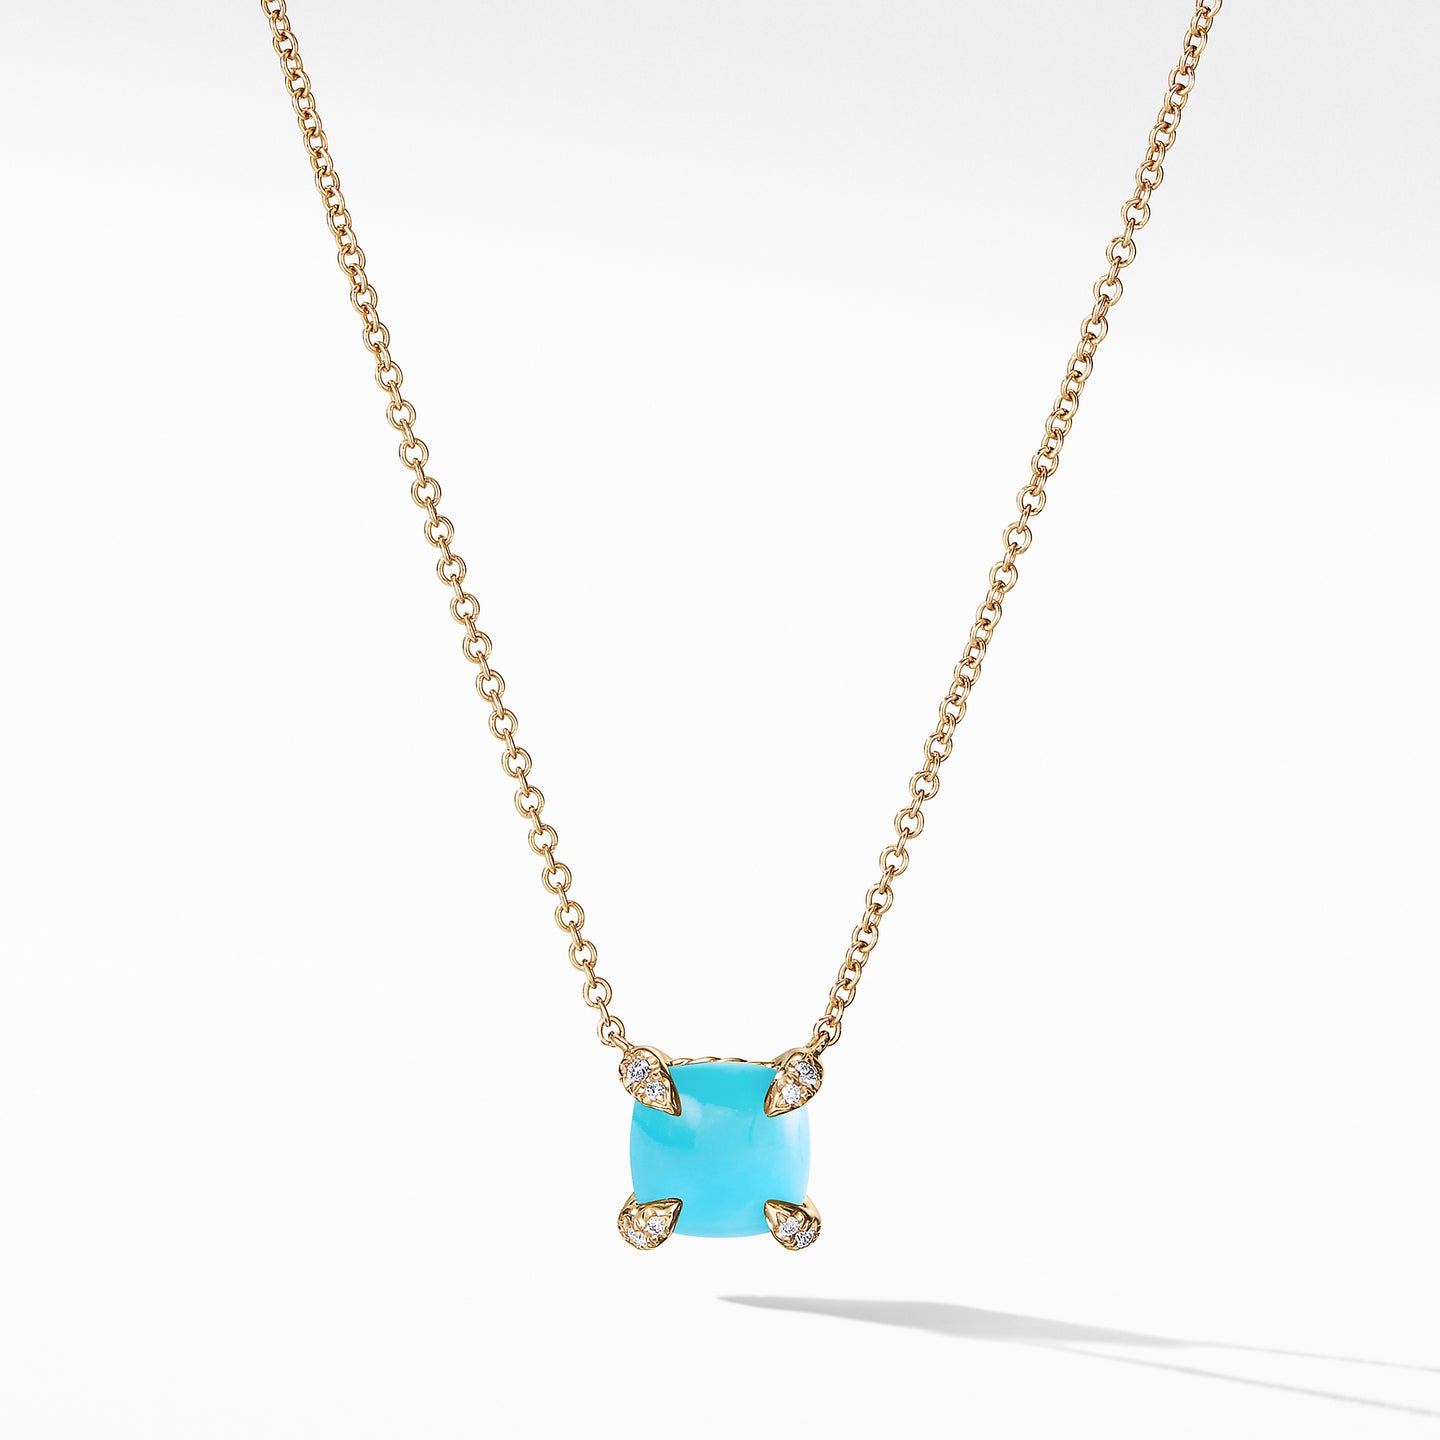 Pendant Necklace with Turquoise and Diamonds in 18K Gold, 18